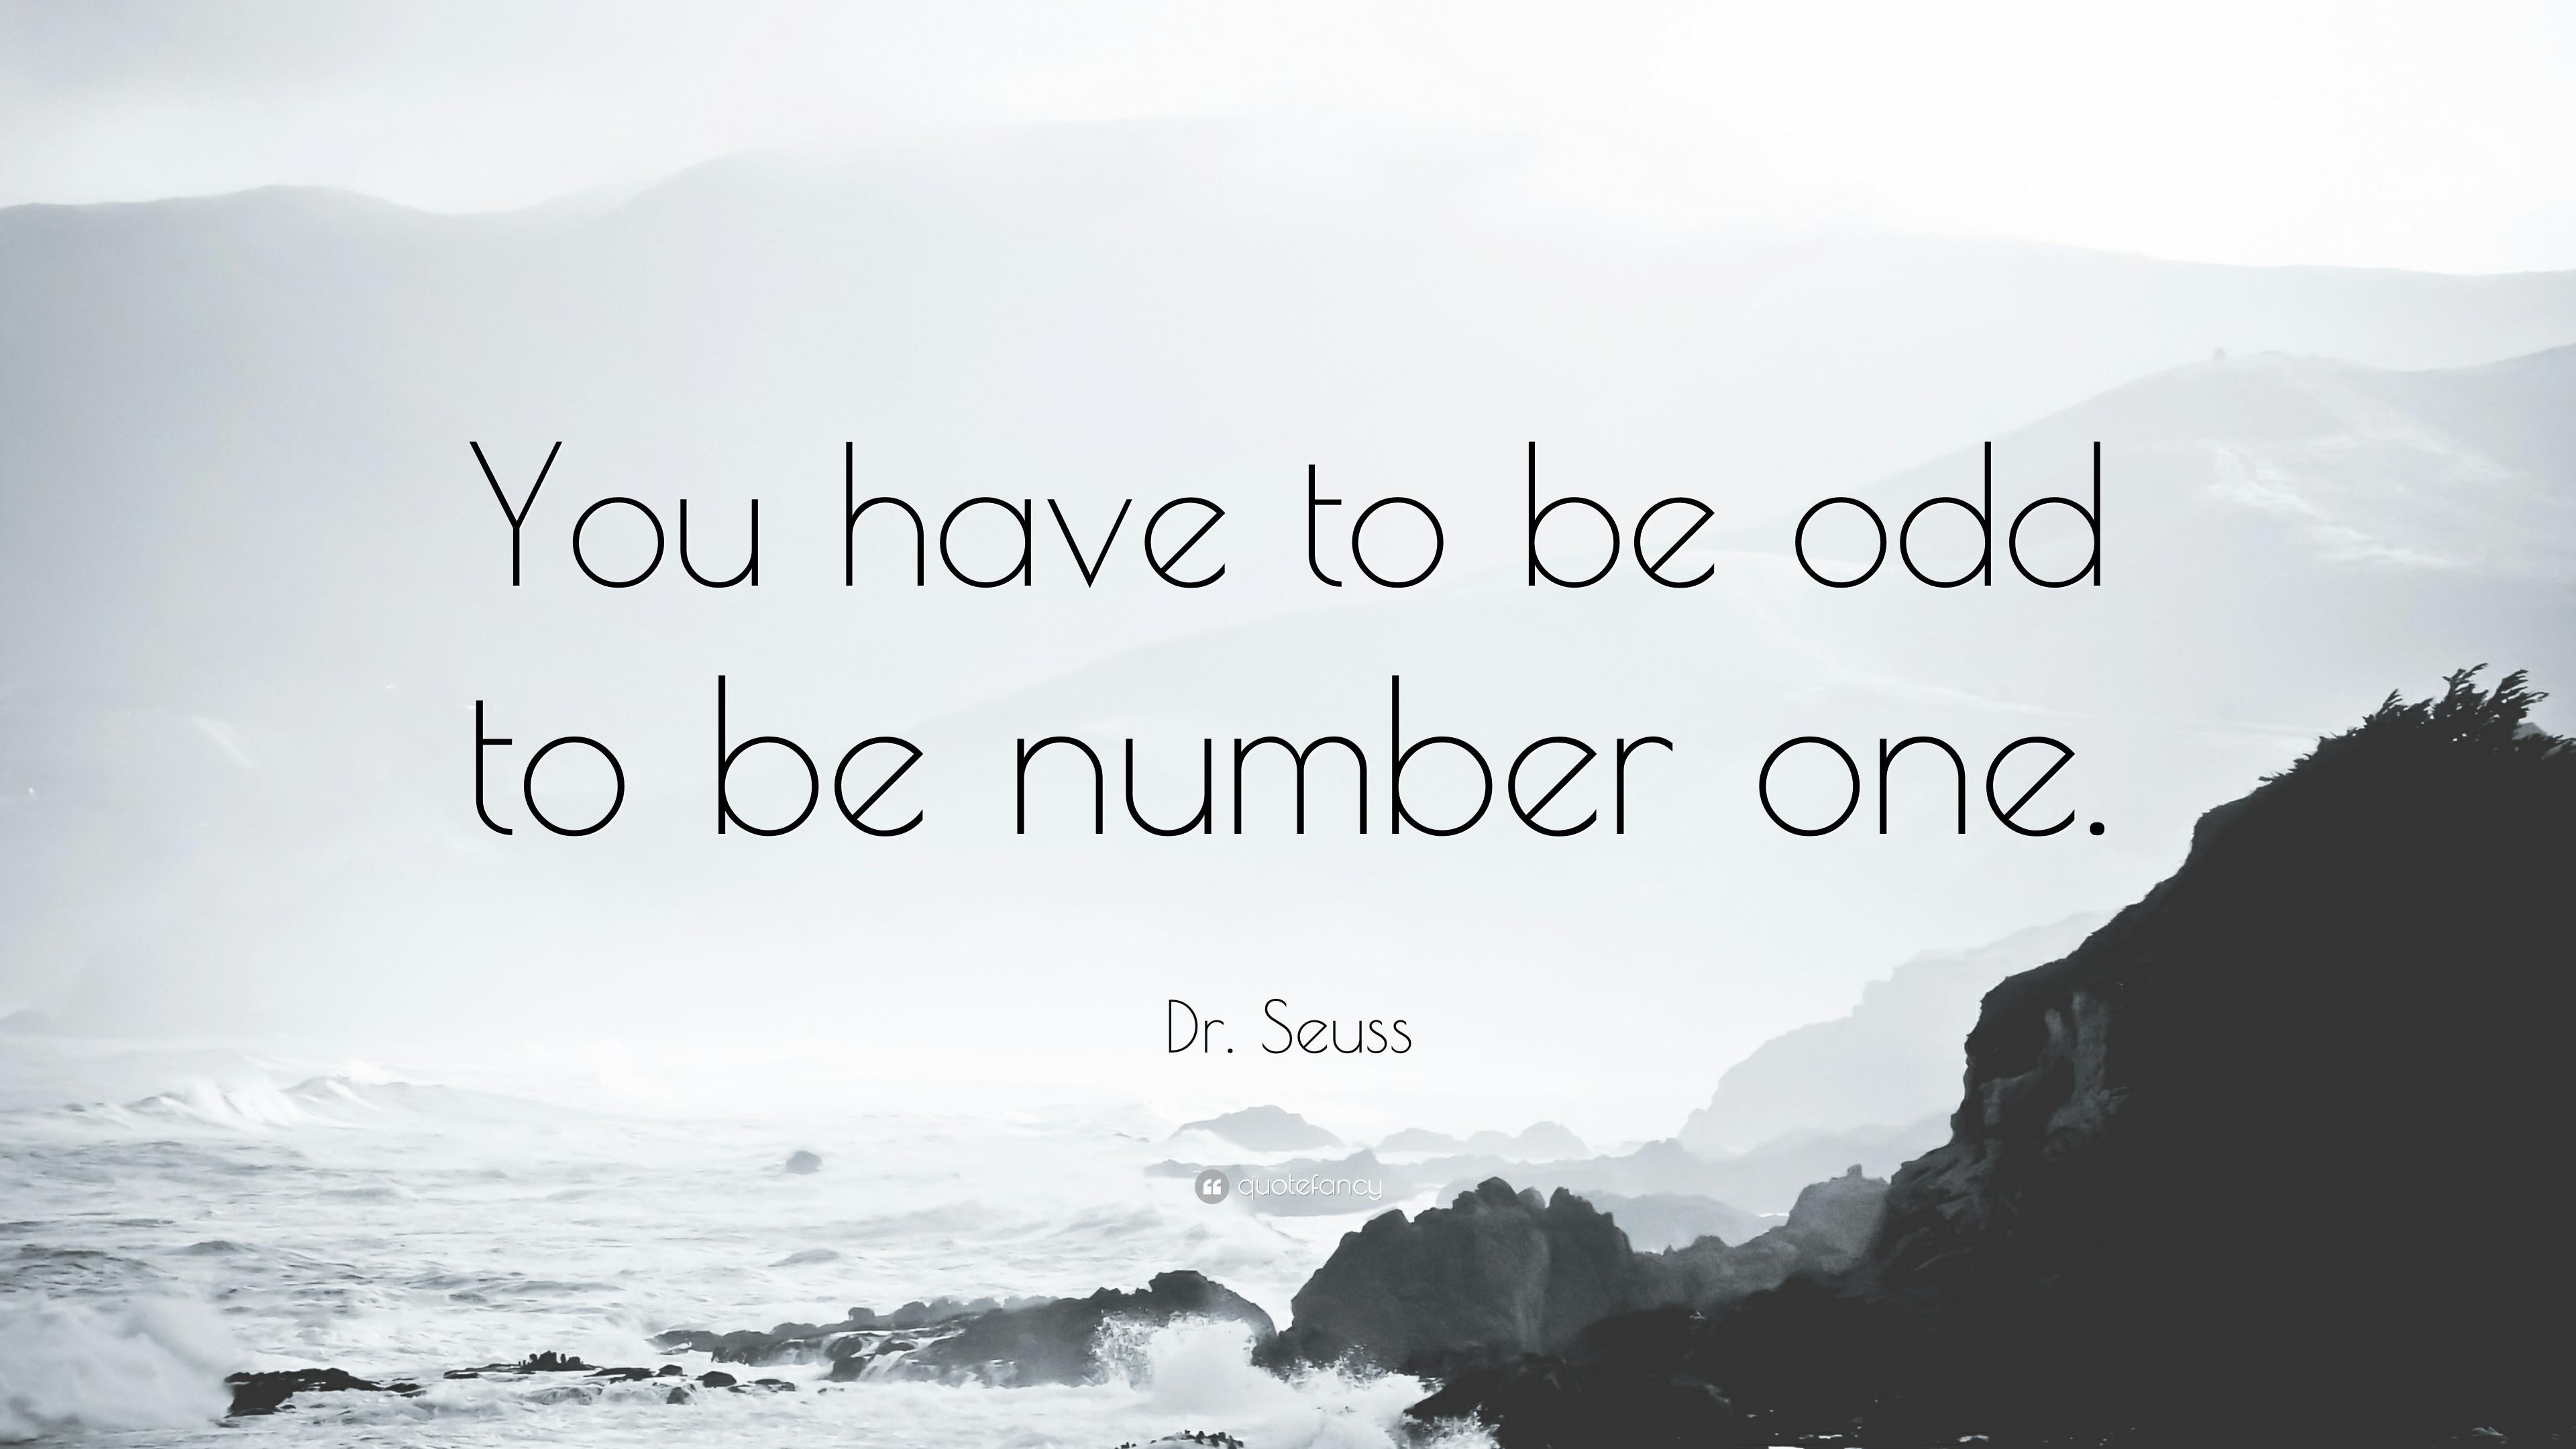 Dr. Seuss Quote: “You have to be odd to be number one.” 12